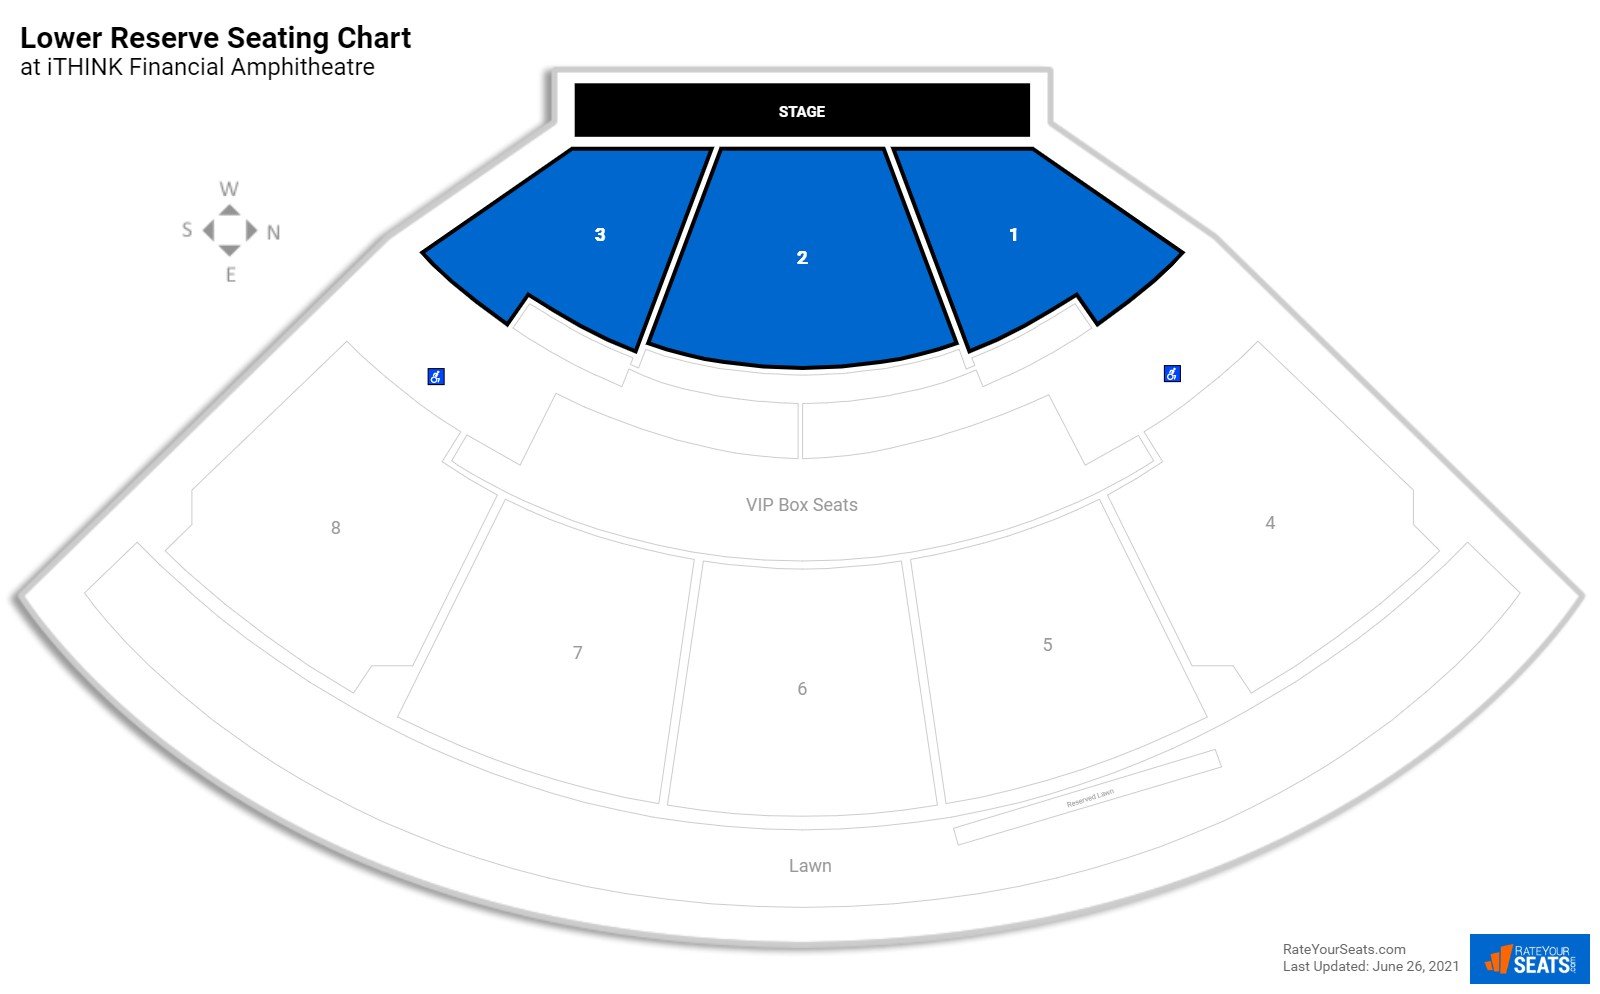 Concert Lower Reserve Seating Chart at iTHINK Financial Amphitheatre